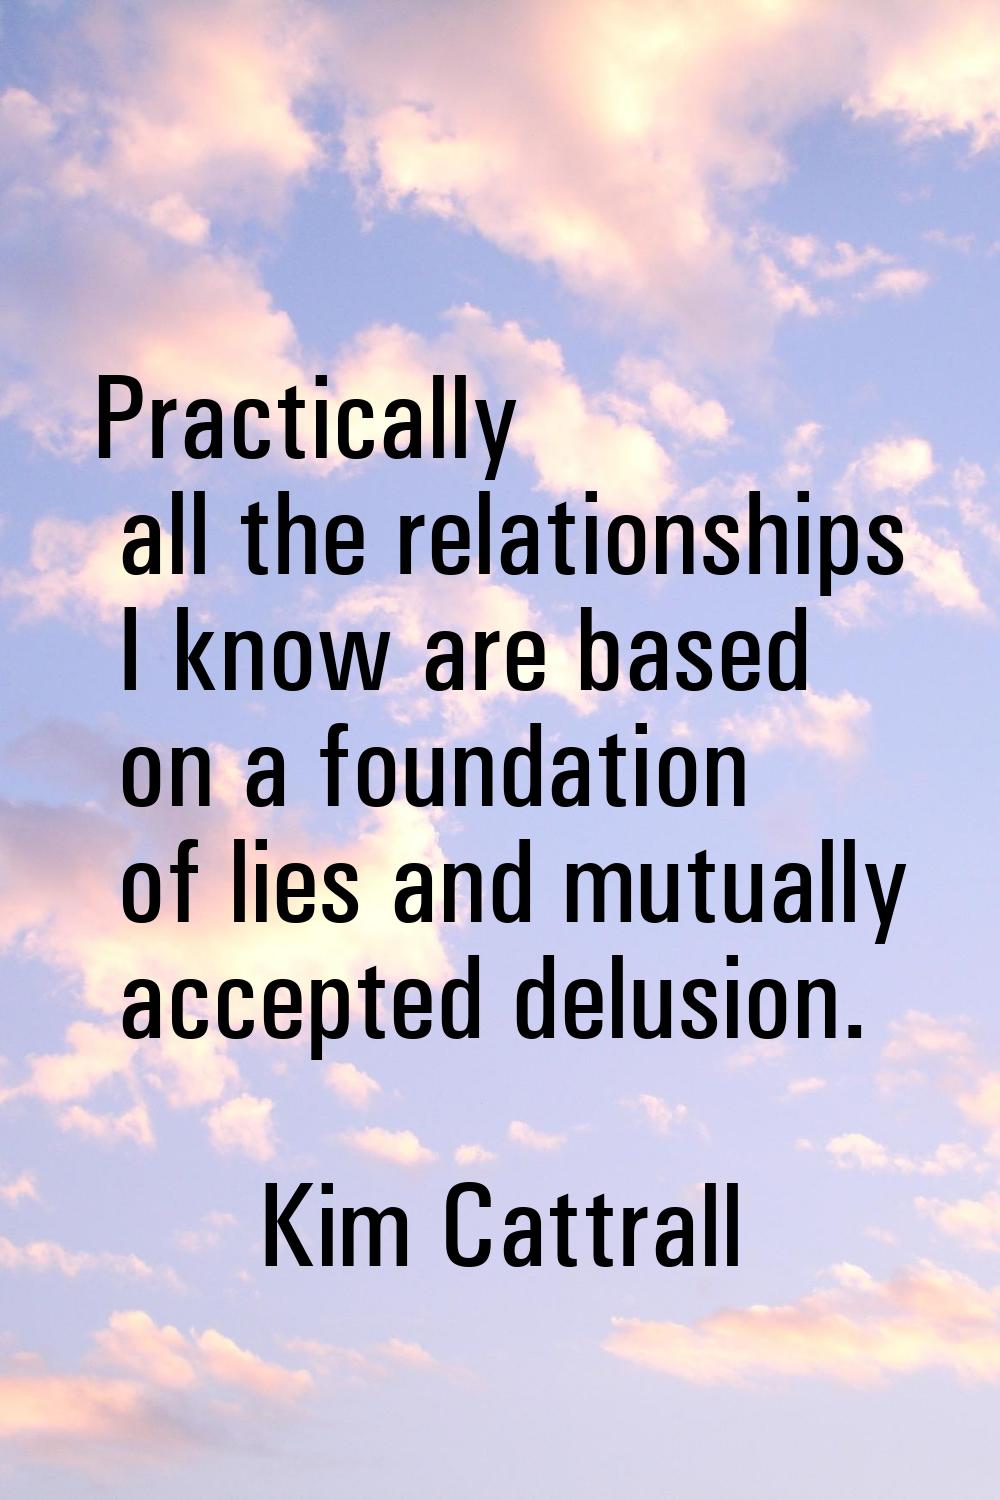 Practically all the relationships I know are based on a foundation of lies and mutually accepted de